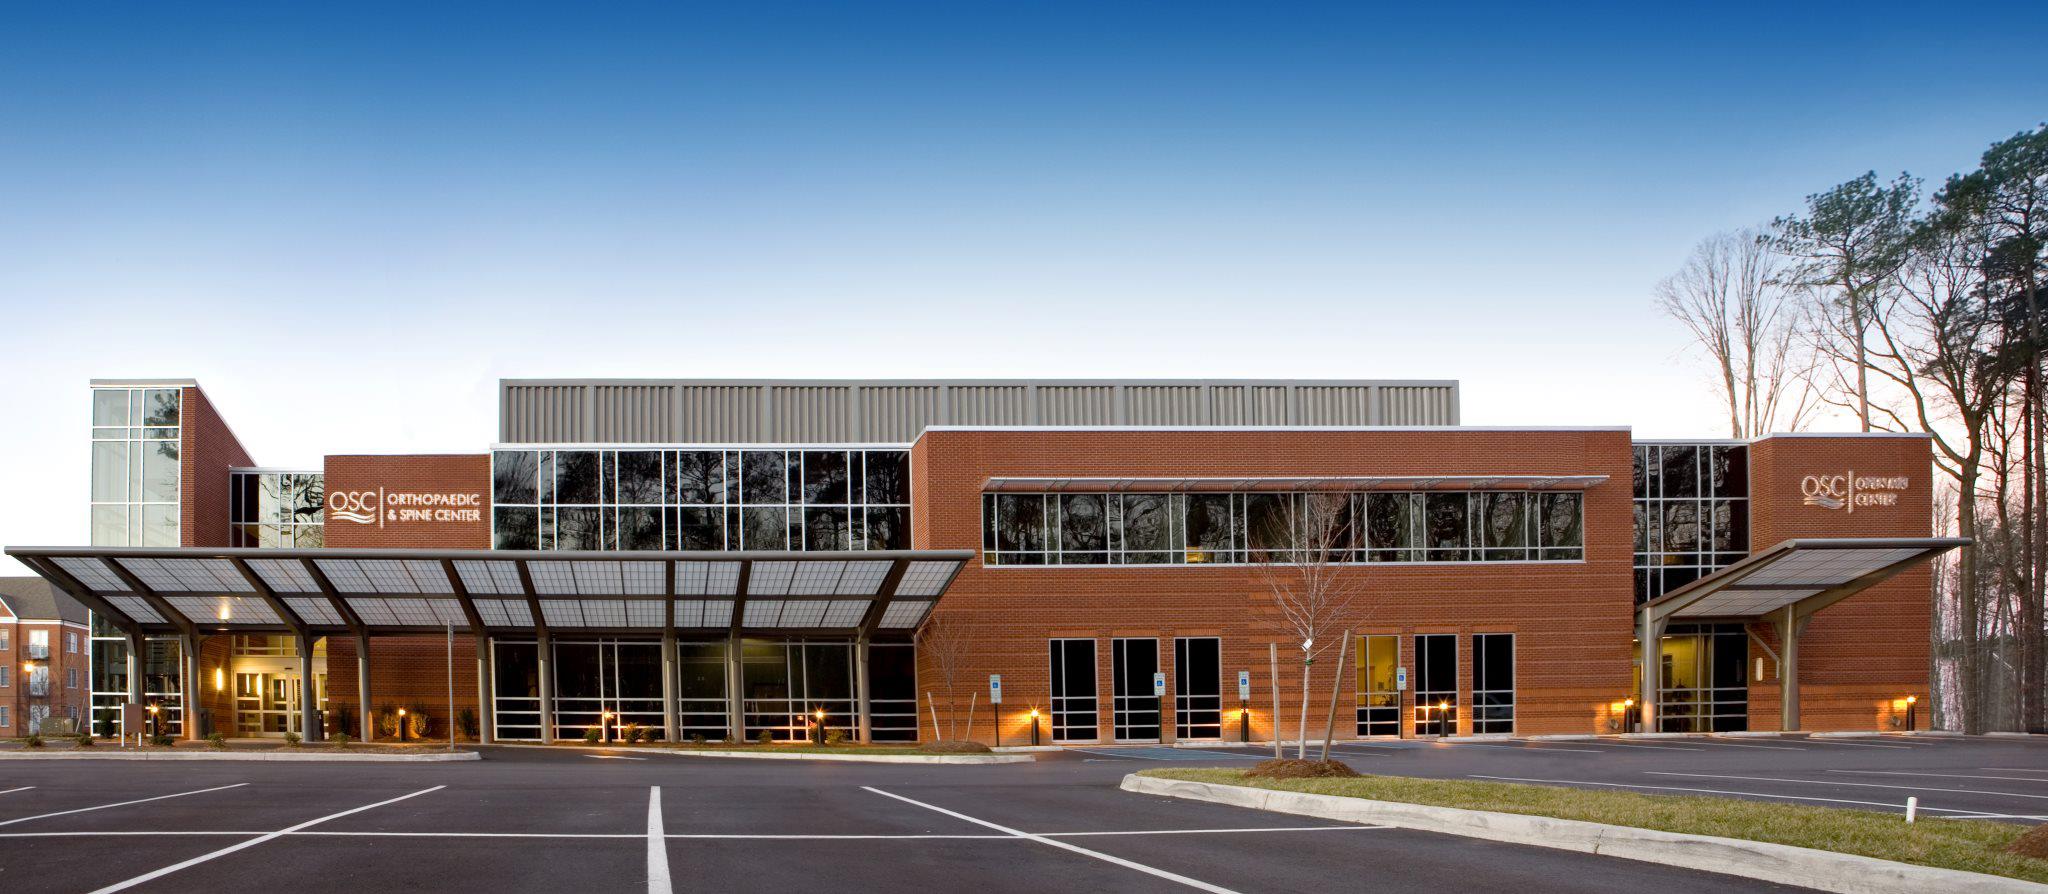 Orthopaedic & Spine Center is located at 250 Nat Turner Boulevard in Newport News, VA.